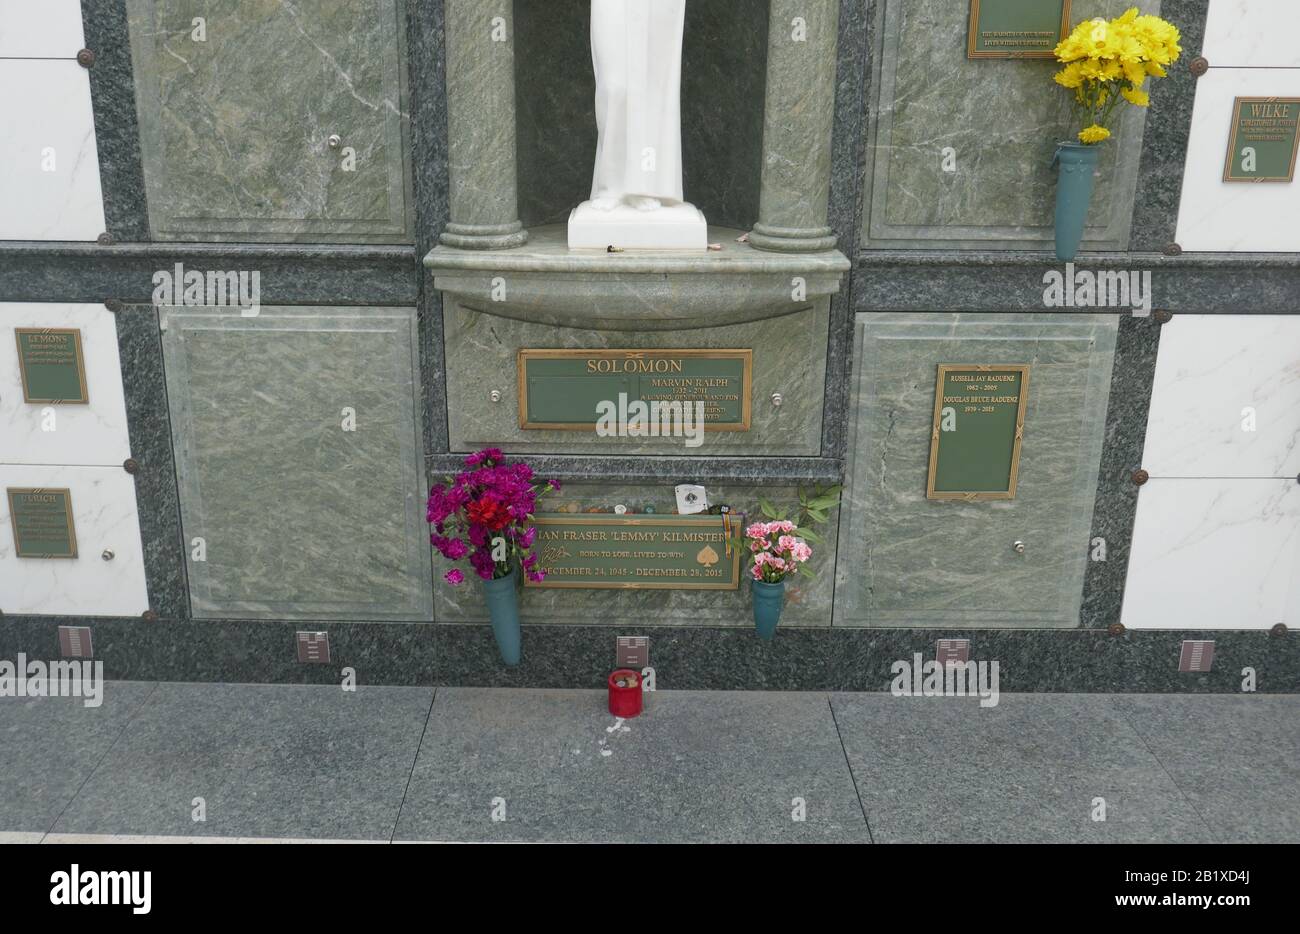 Los Angeles, California, USA 27th February 2020 A general view of atmosphere of Ian Fraser 'Lemmy' Kilmister's Grave on February 27, 2020 at Forest Lawn Memorial Park in Los Angeles, California, USA. Photo by Barry King/Alamy Stock Photo Stock Photo